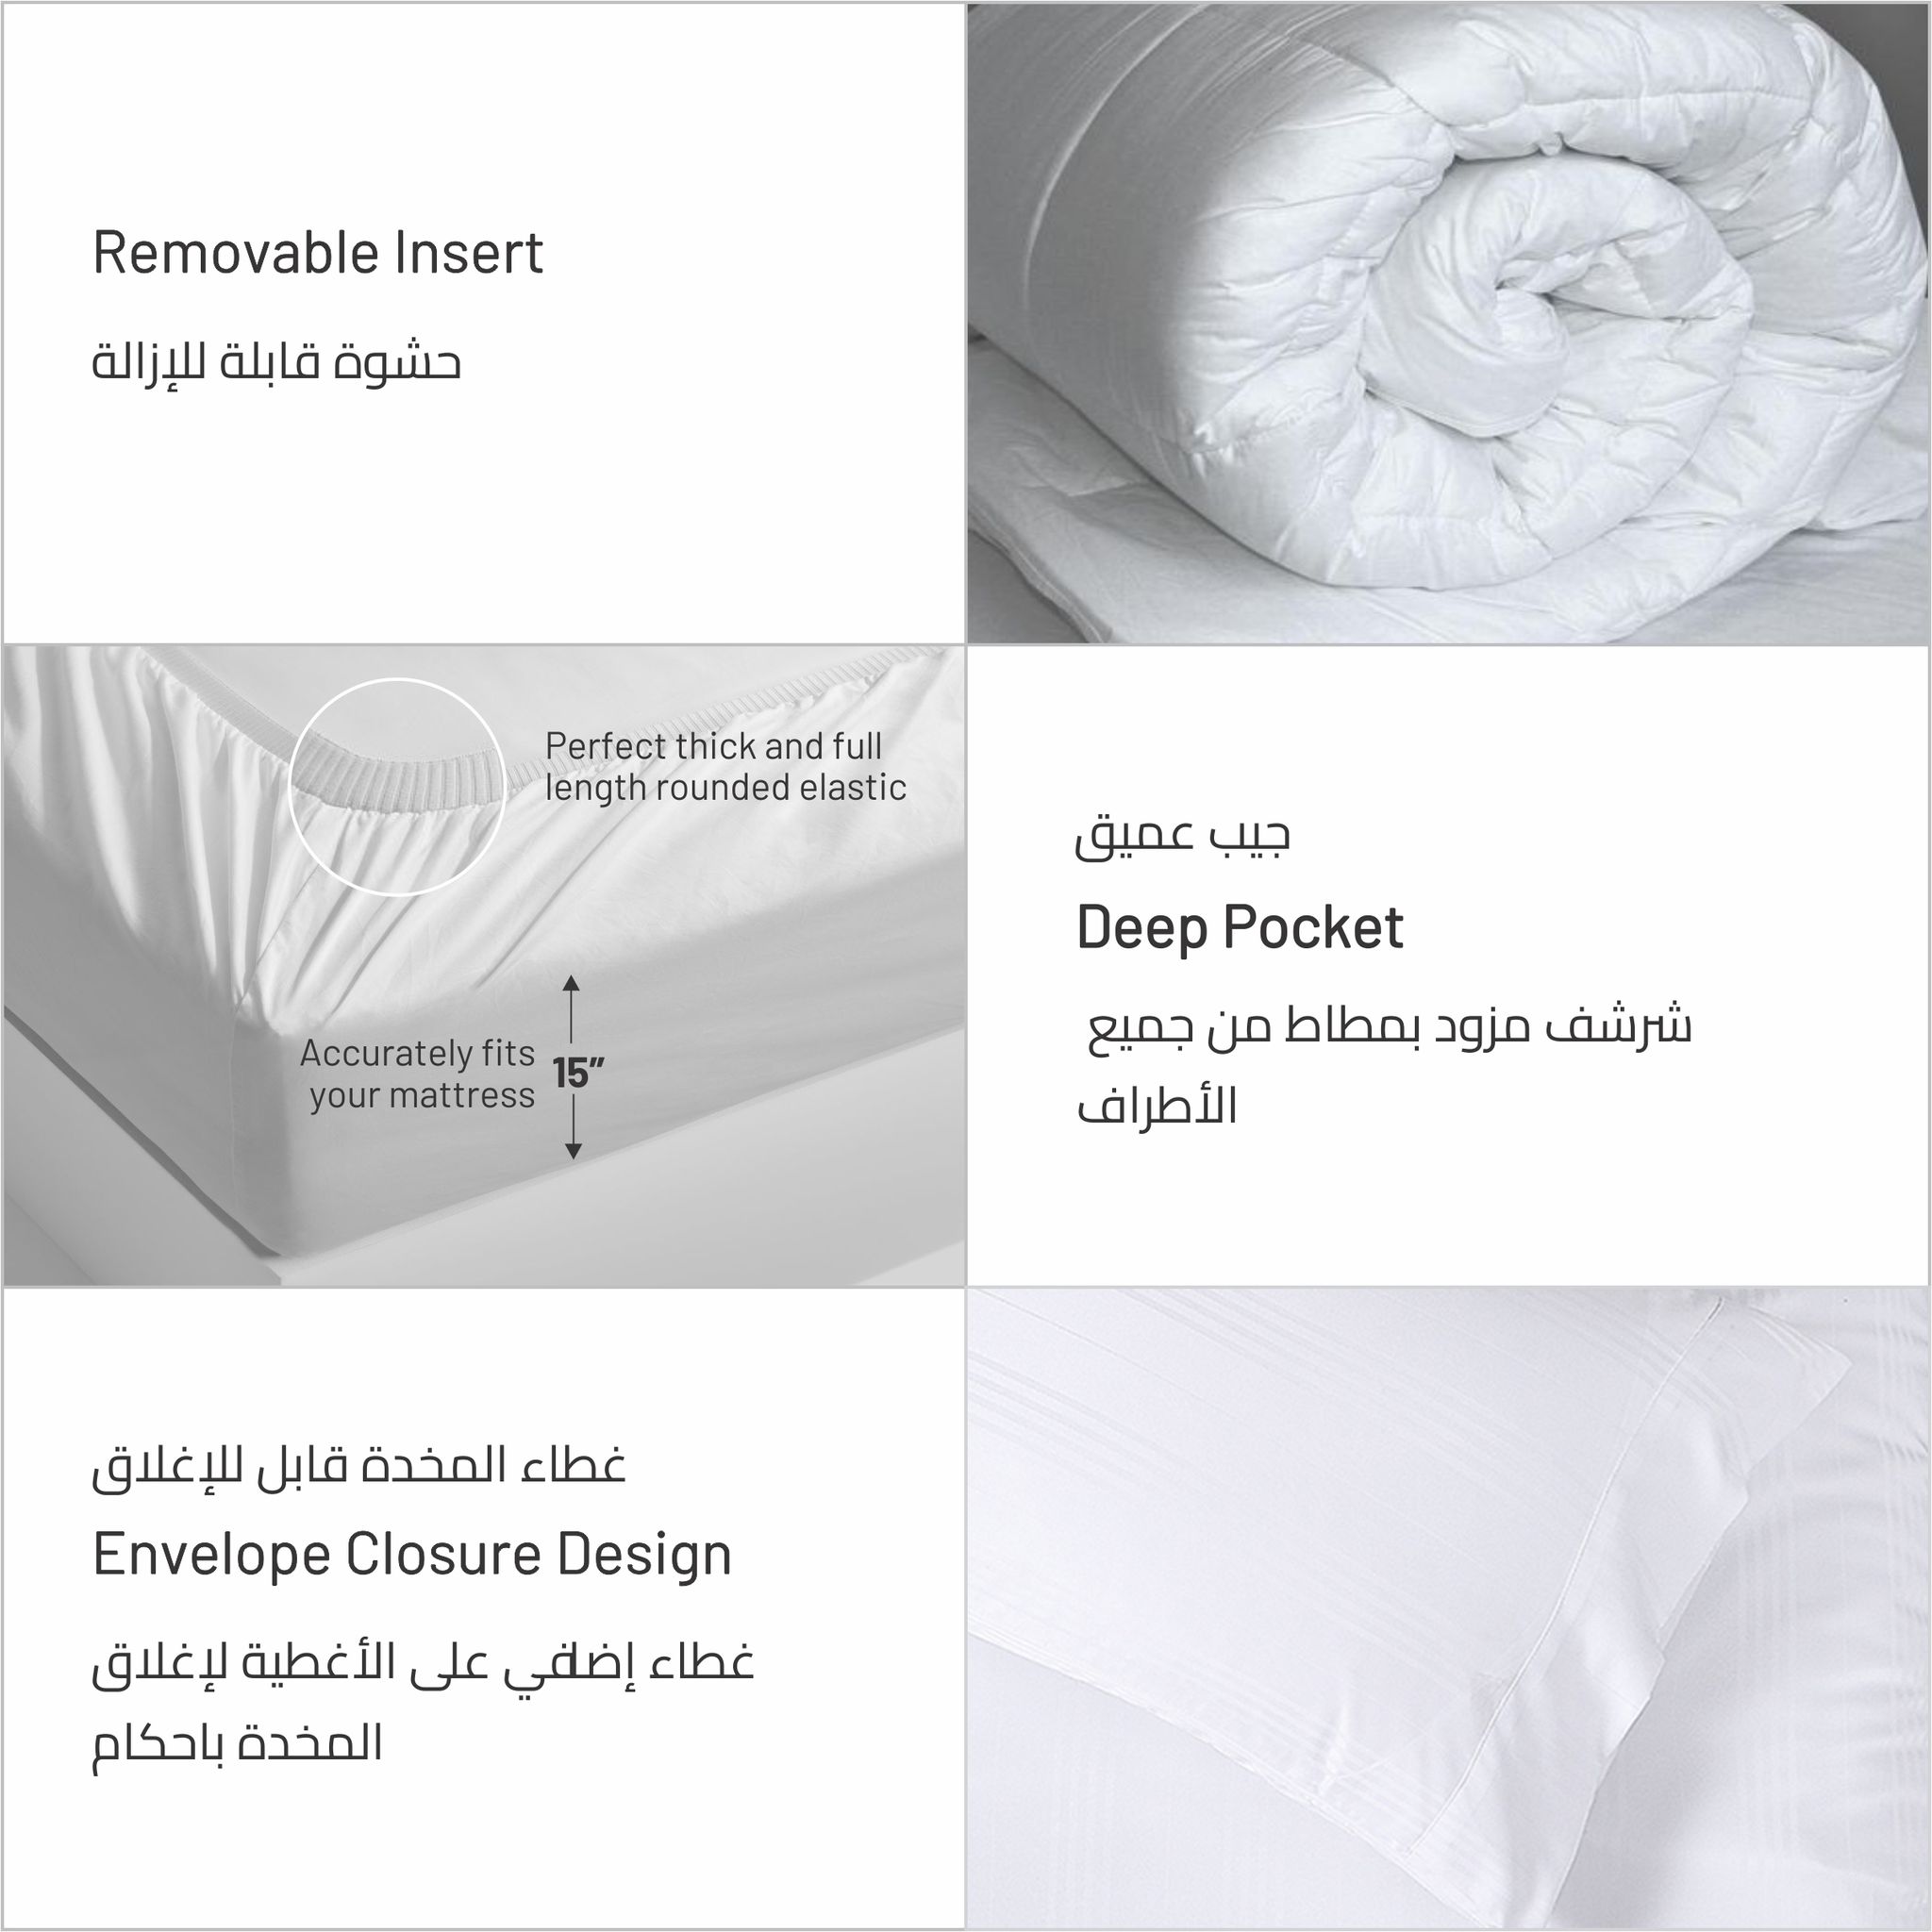 7-Piece King Size Italian Jacquard Luxurious Hotel Style Comforter , Verigated Stripes with Removable Filler, White Colour